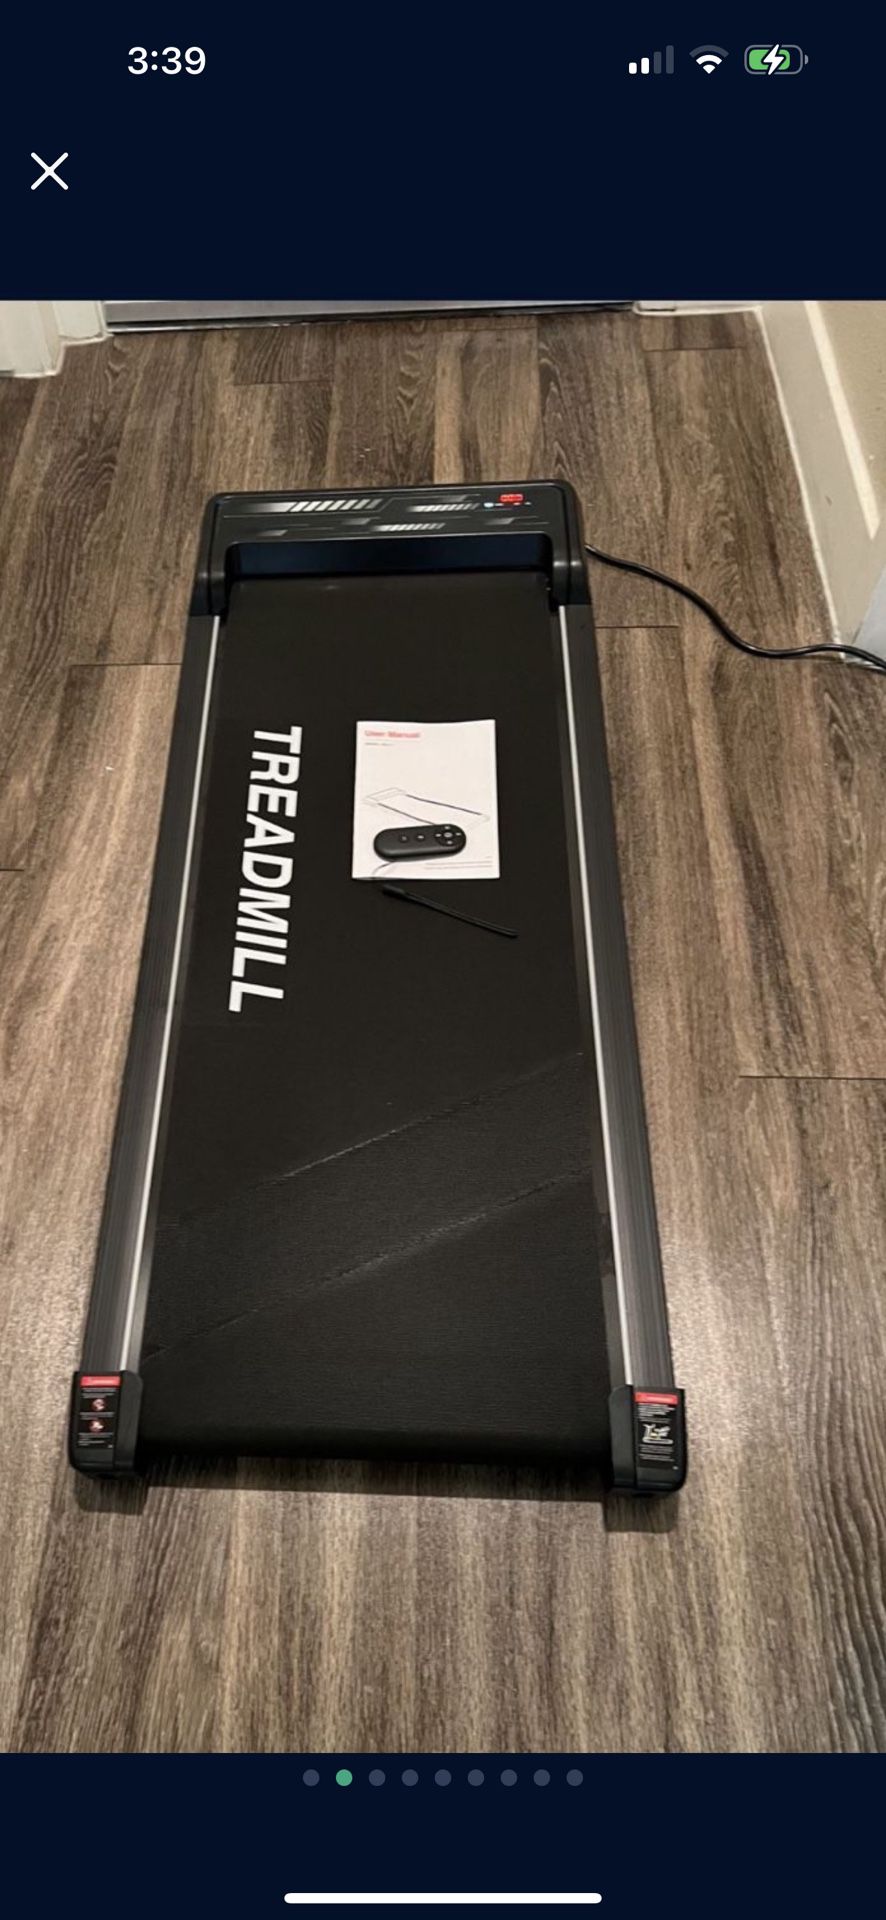 Treadmill CIIHIC W01 Under Desk Walking Pad Exercise Workout 